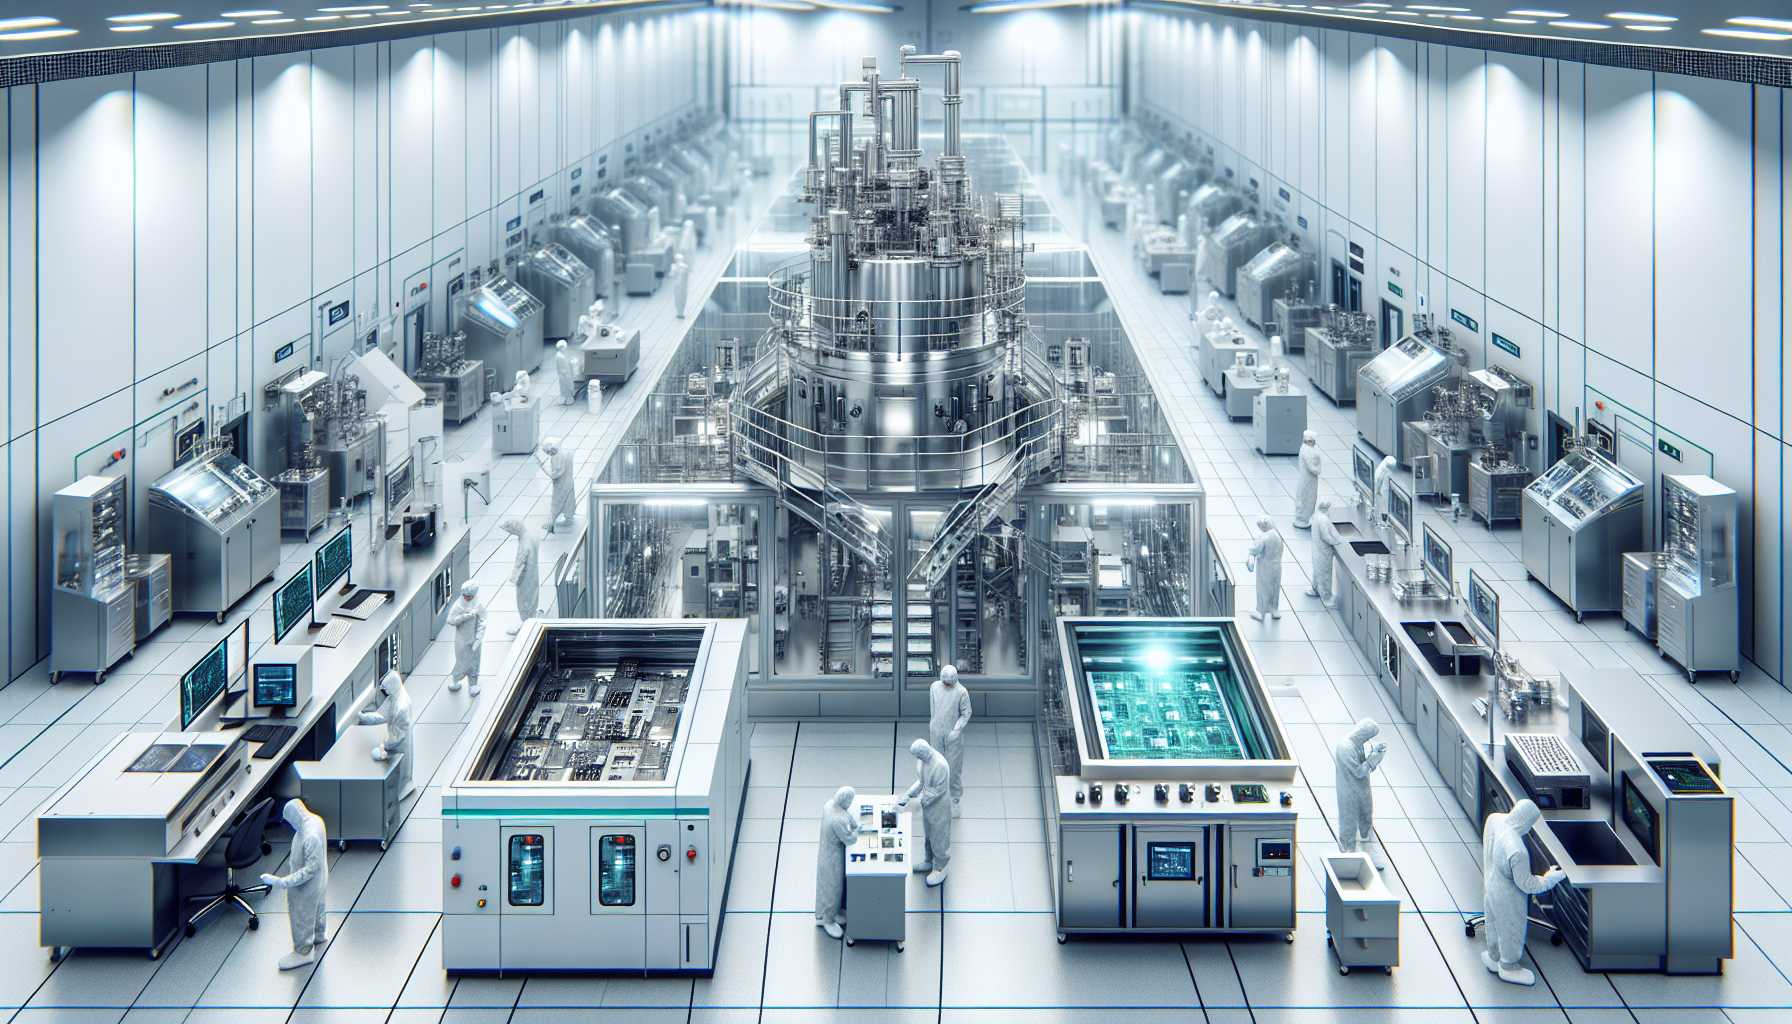 a state-of-the-art semiconductor fabrication plant